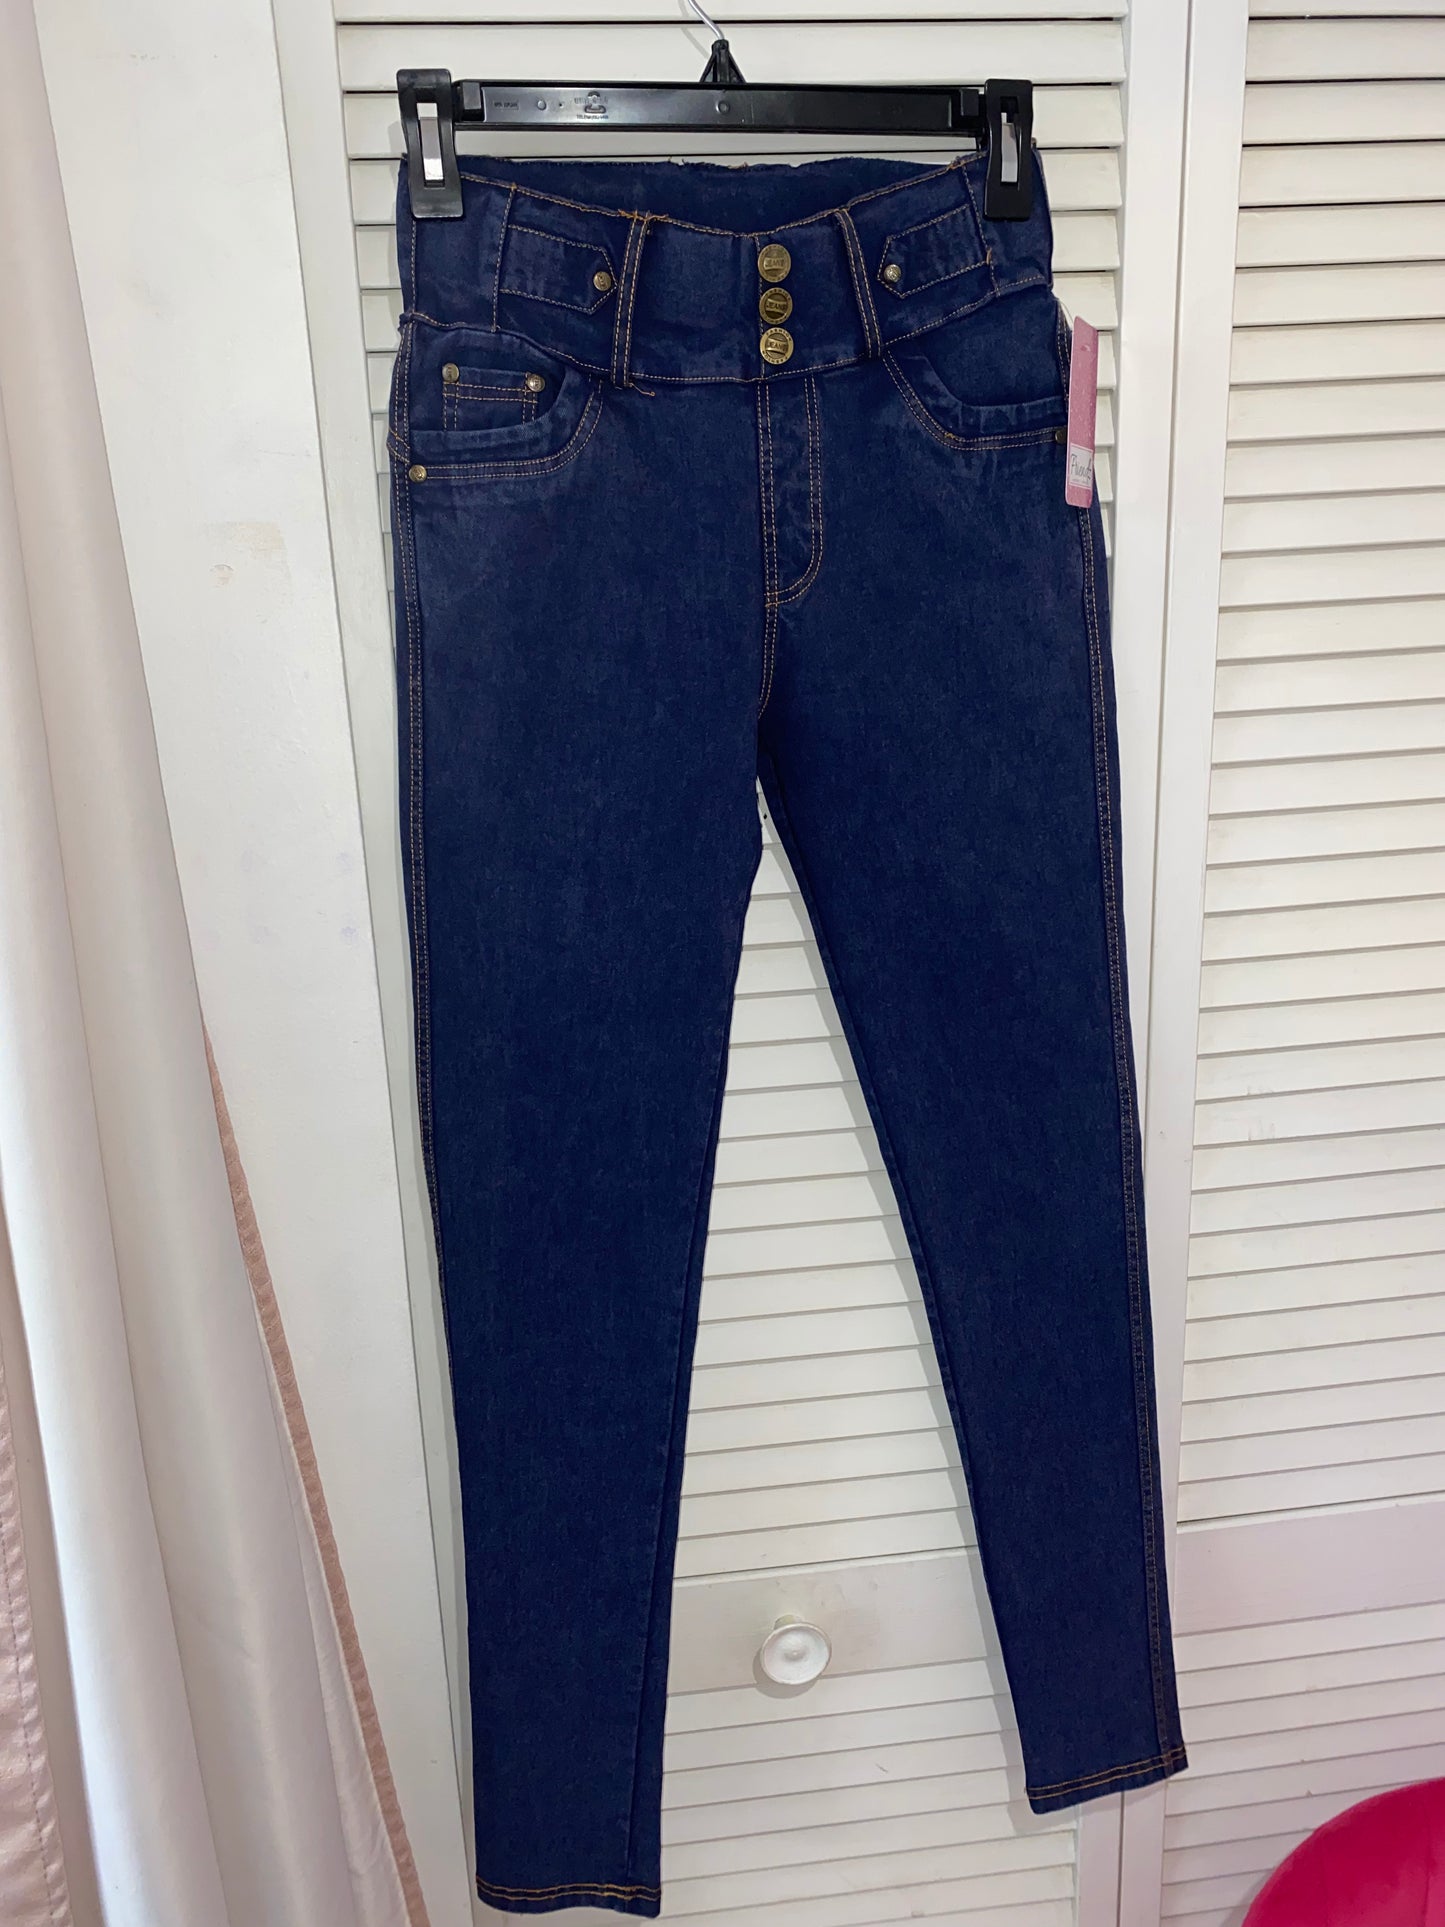 Denim Stretch Jeggings High Waisted Stretch Jeans S/M